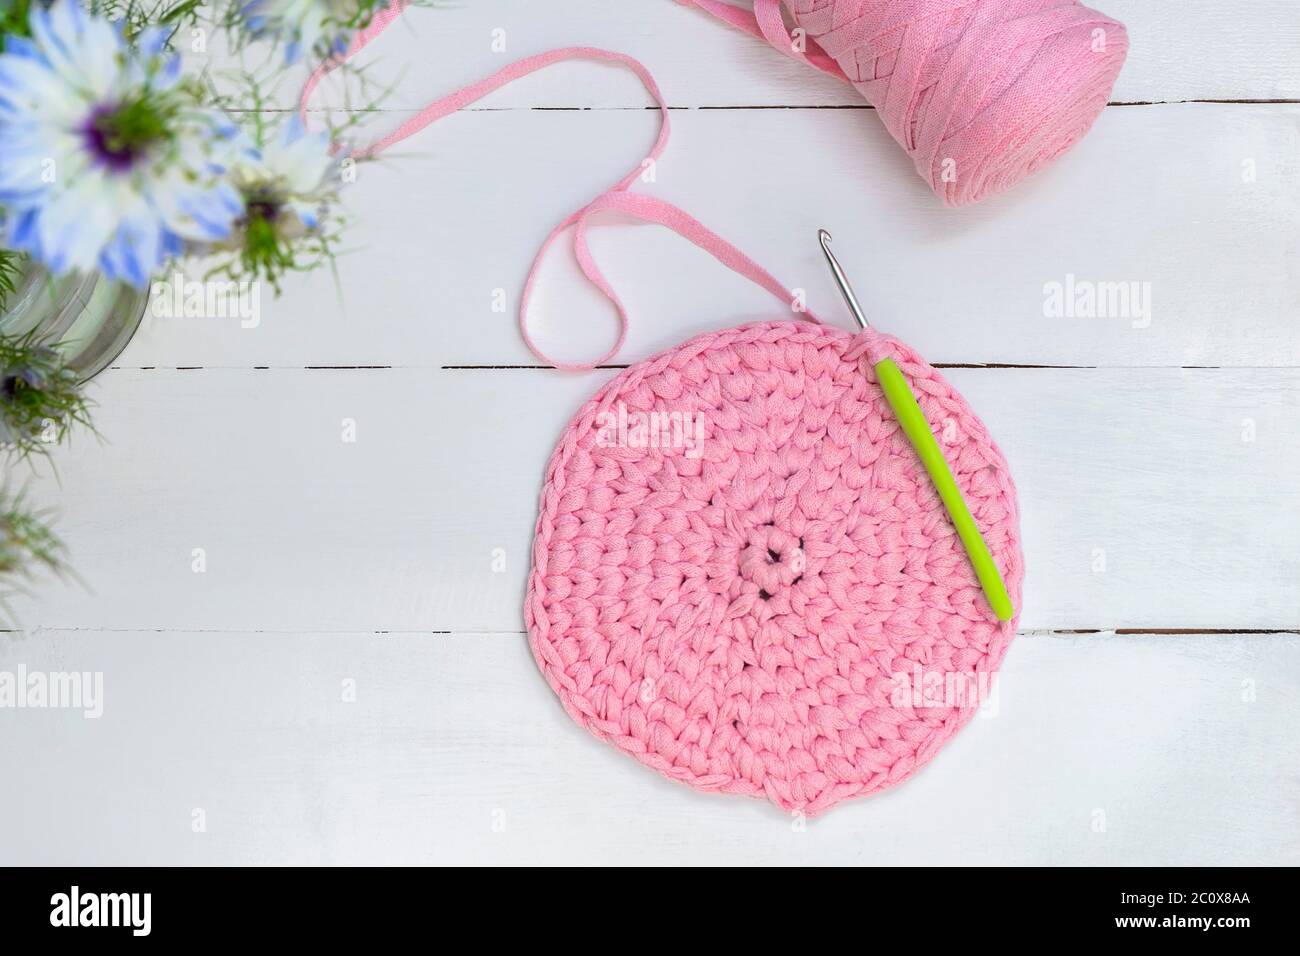 Crocheting and home hobby concept. Top view of crochet work with